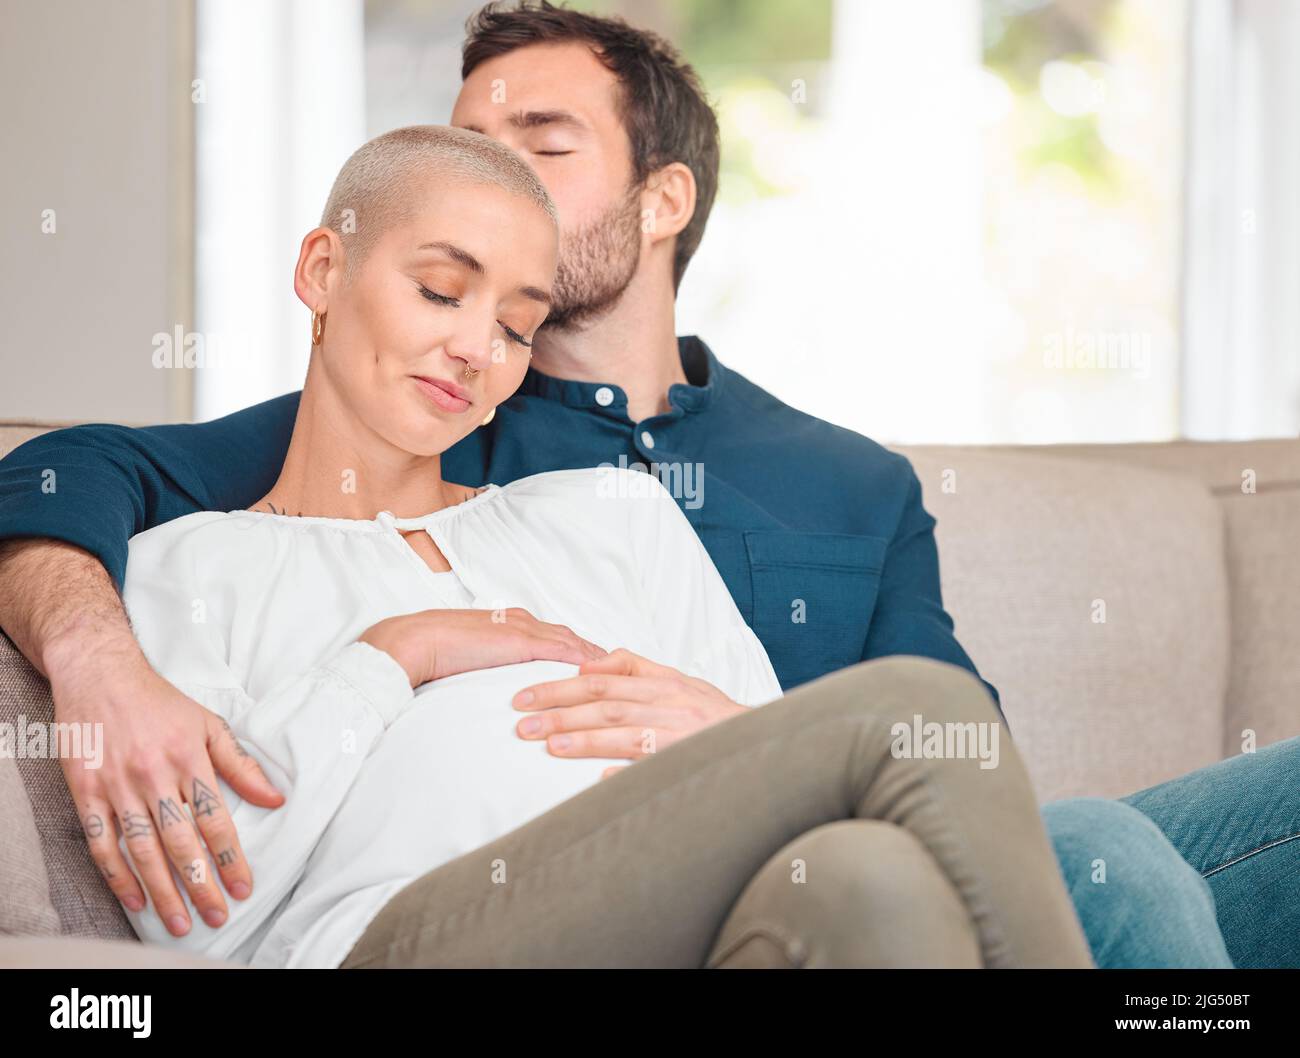 Starting a family. Cropped shot of an affectionate young expectant couple sitting on the sofa at home. Stock Photo